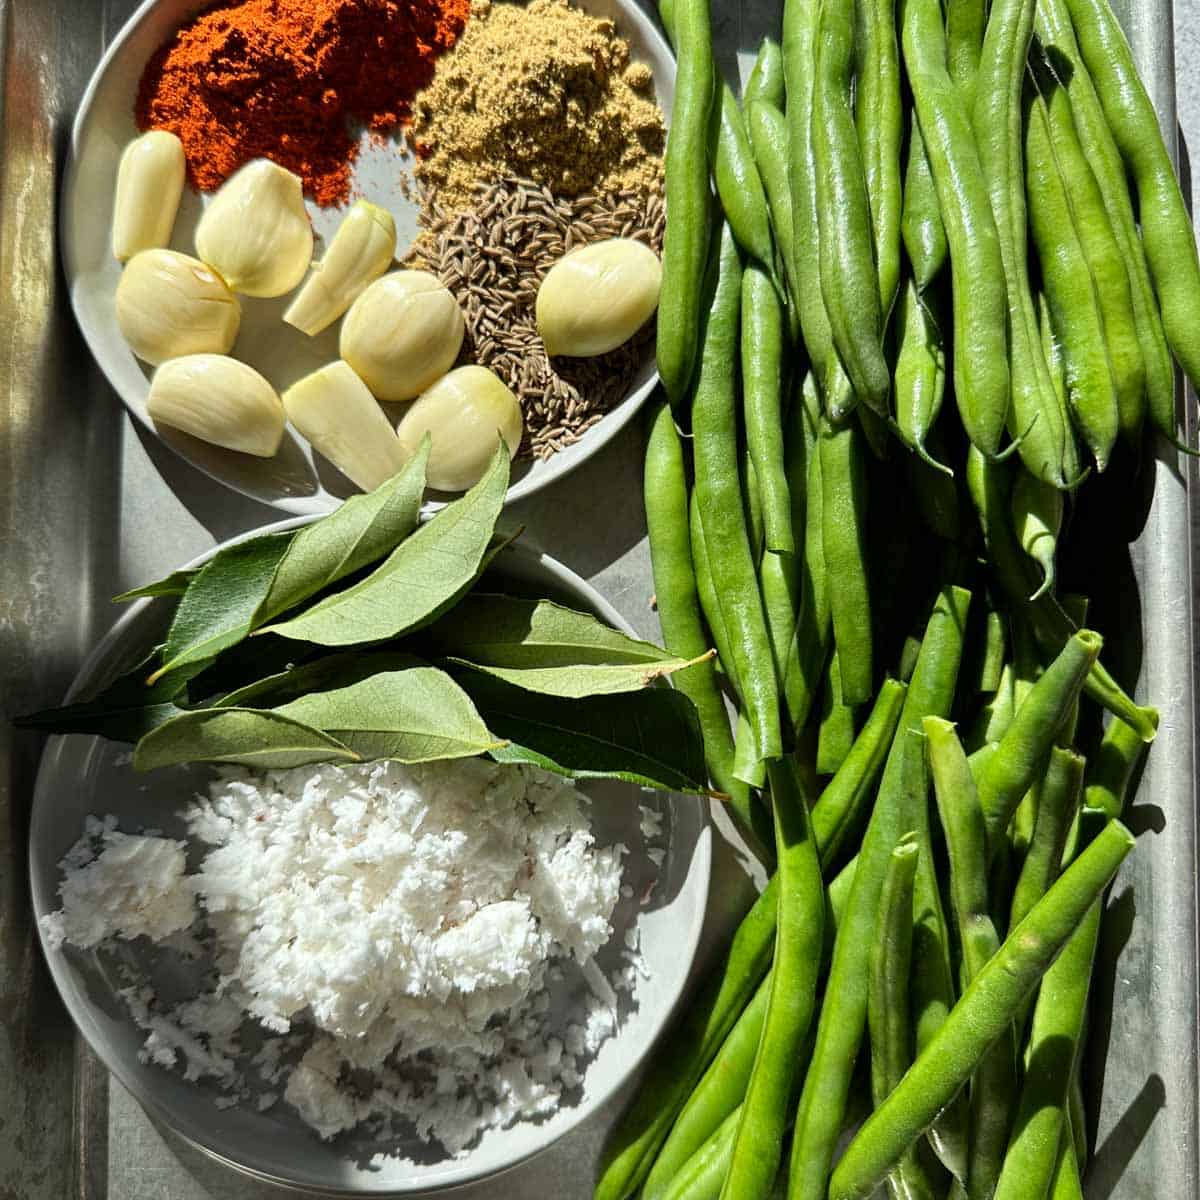 Ingredients on a sheet tray for beans poriyal. Green beans on the right hand side. Garlic, spices, freshly shredded coconut and curry leaves on the left side.